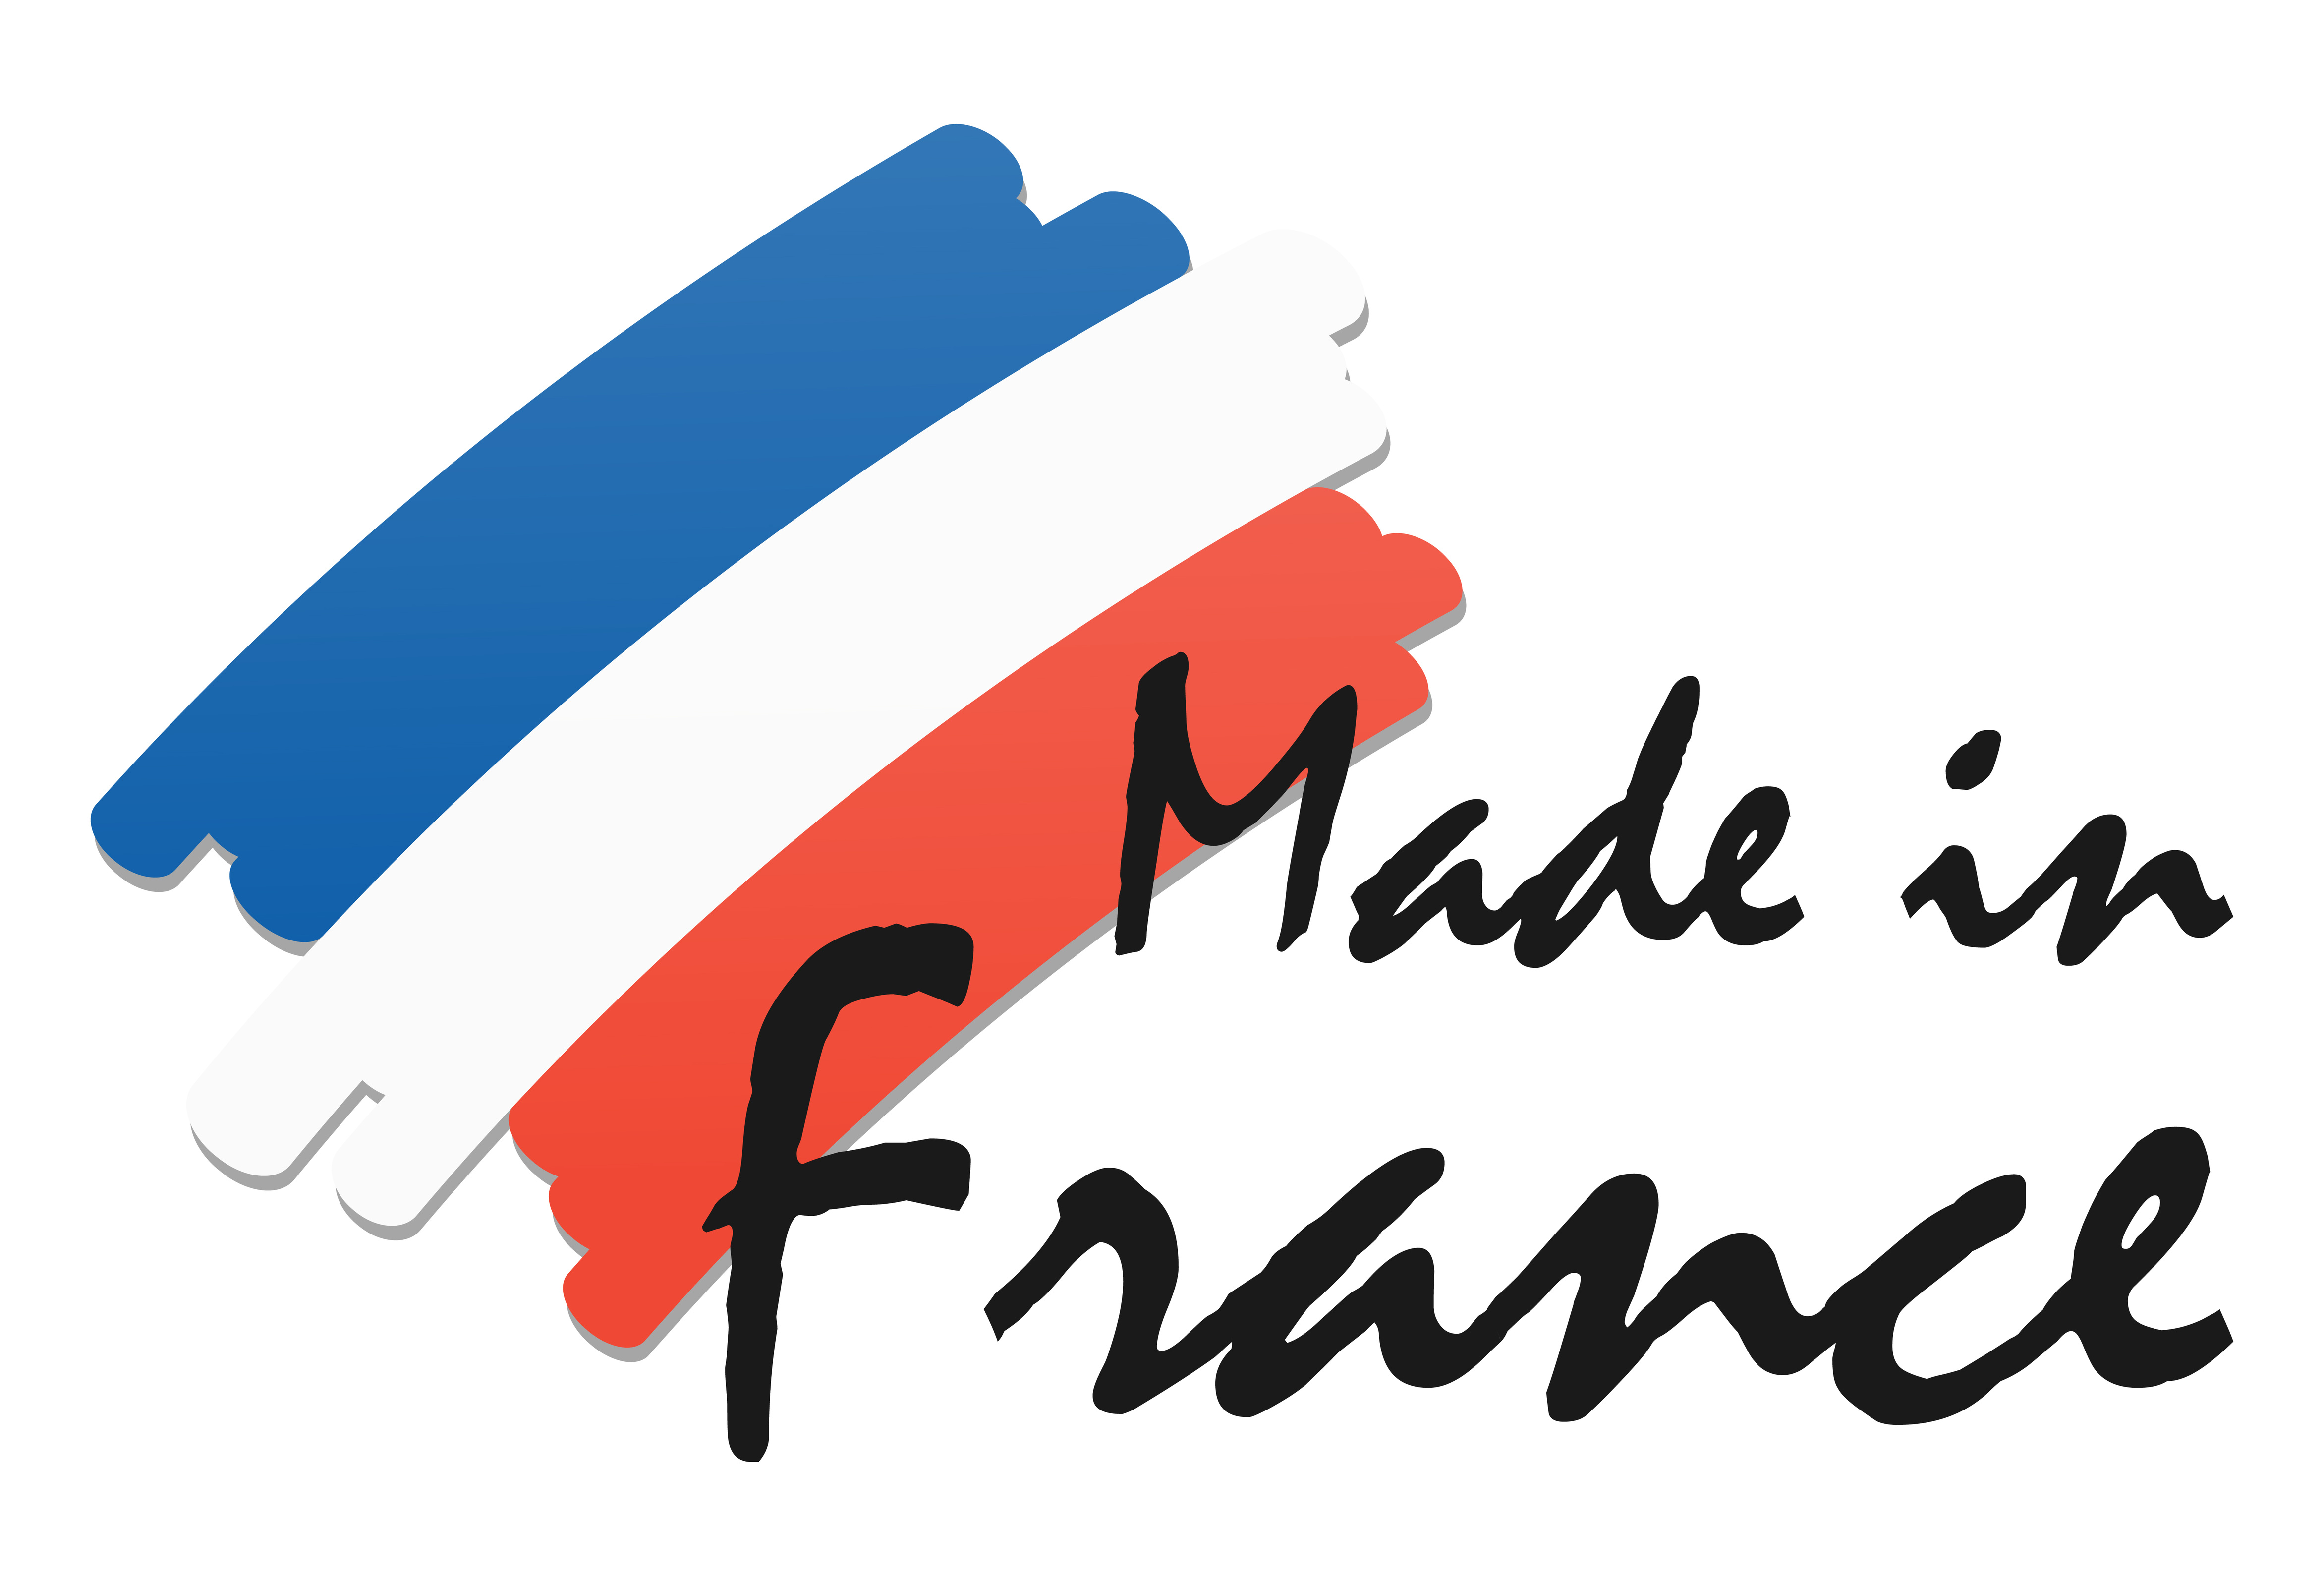 Le made in France